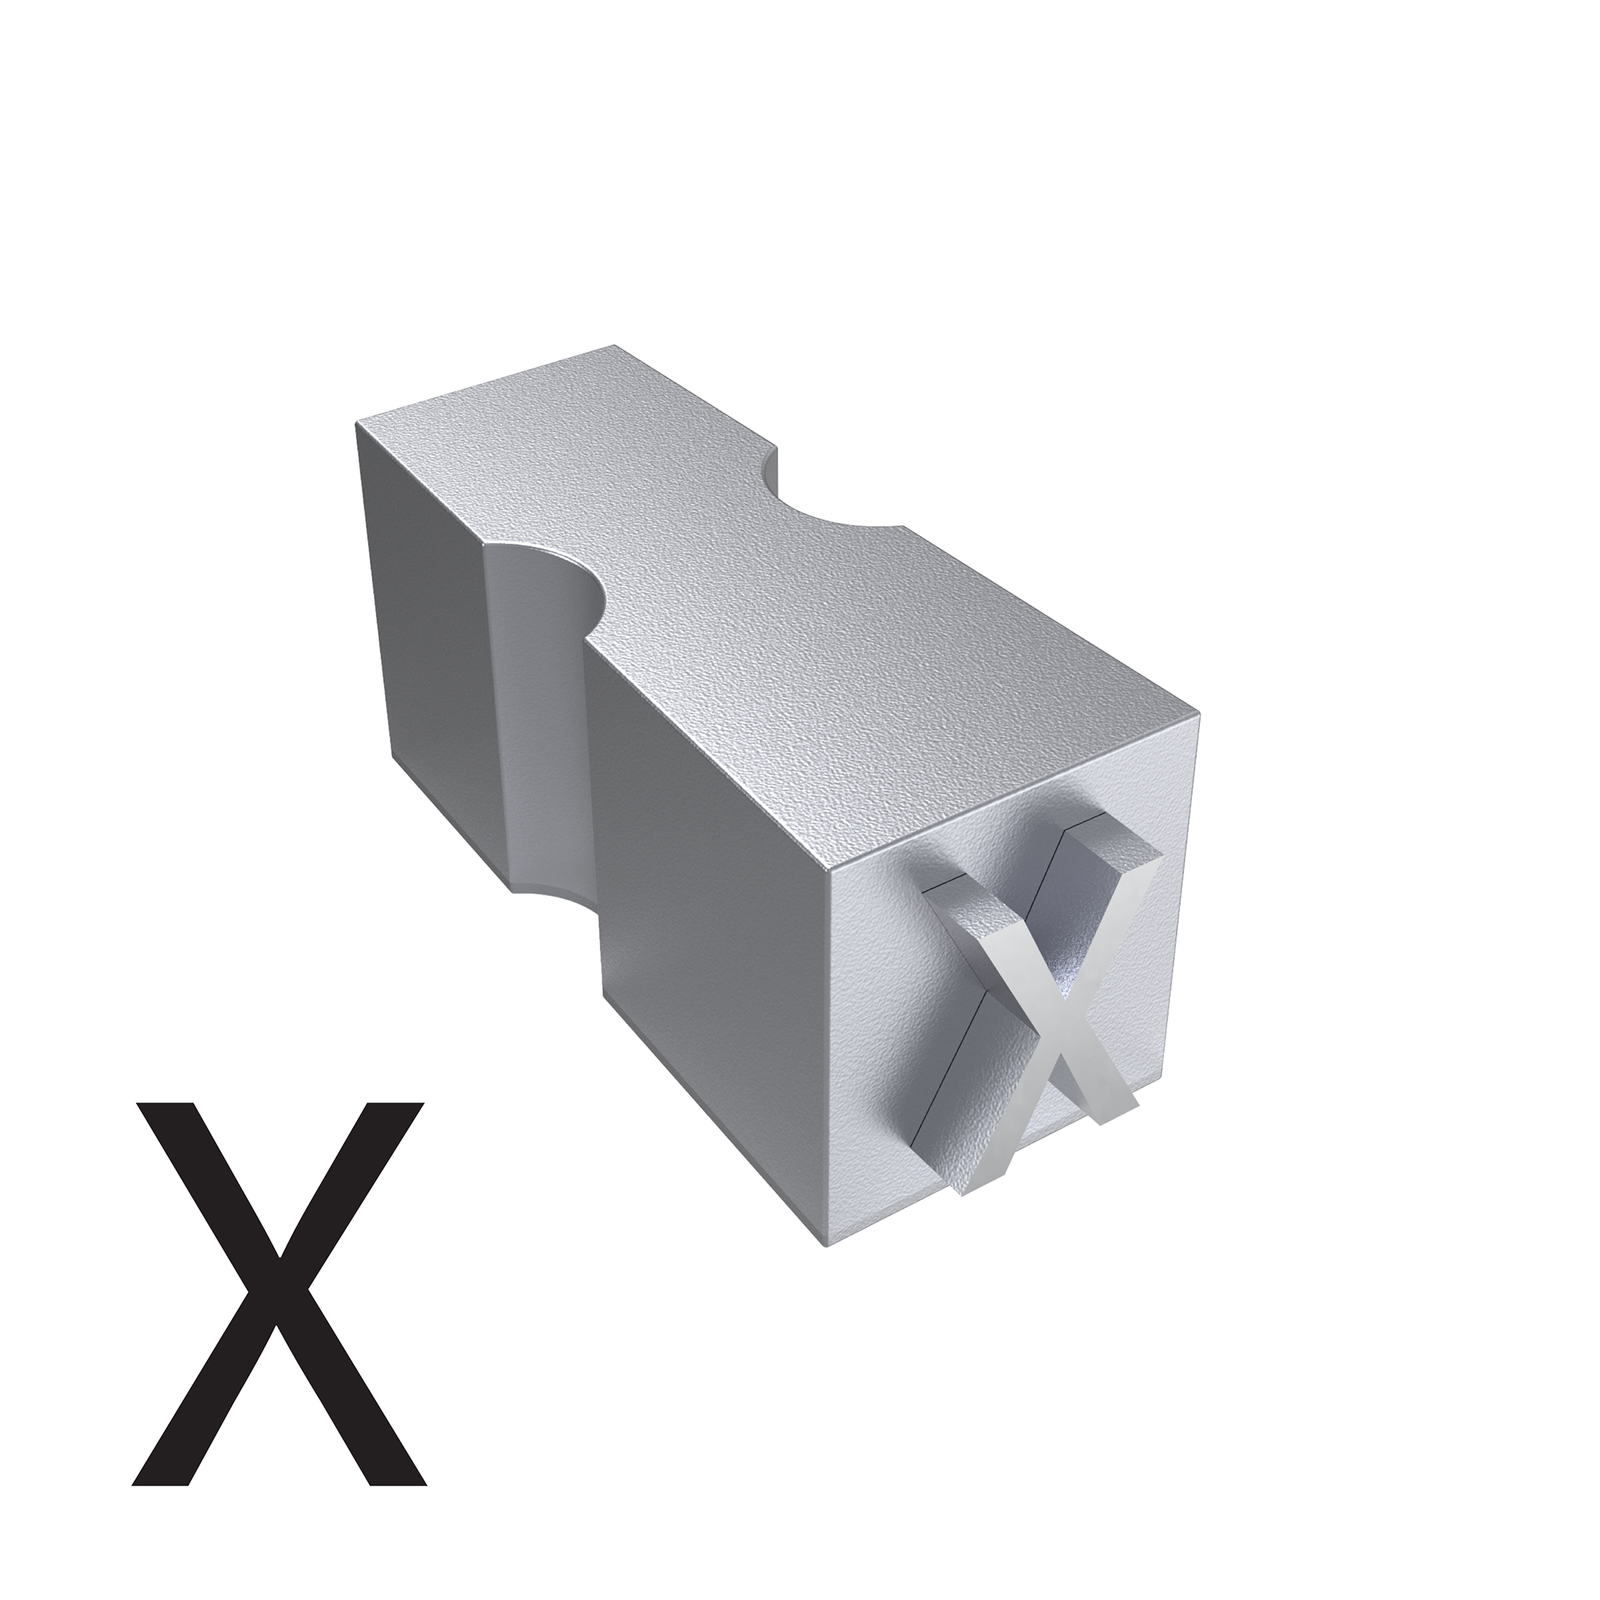 5.5mm letter X type used for printers